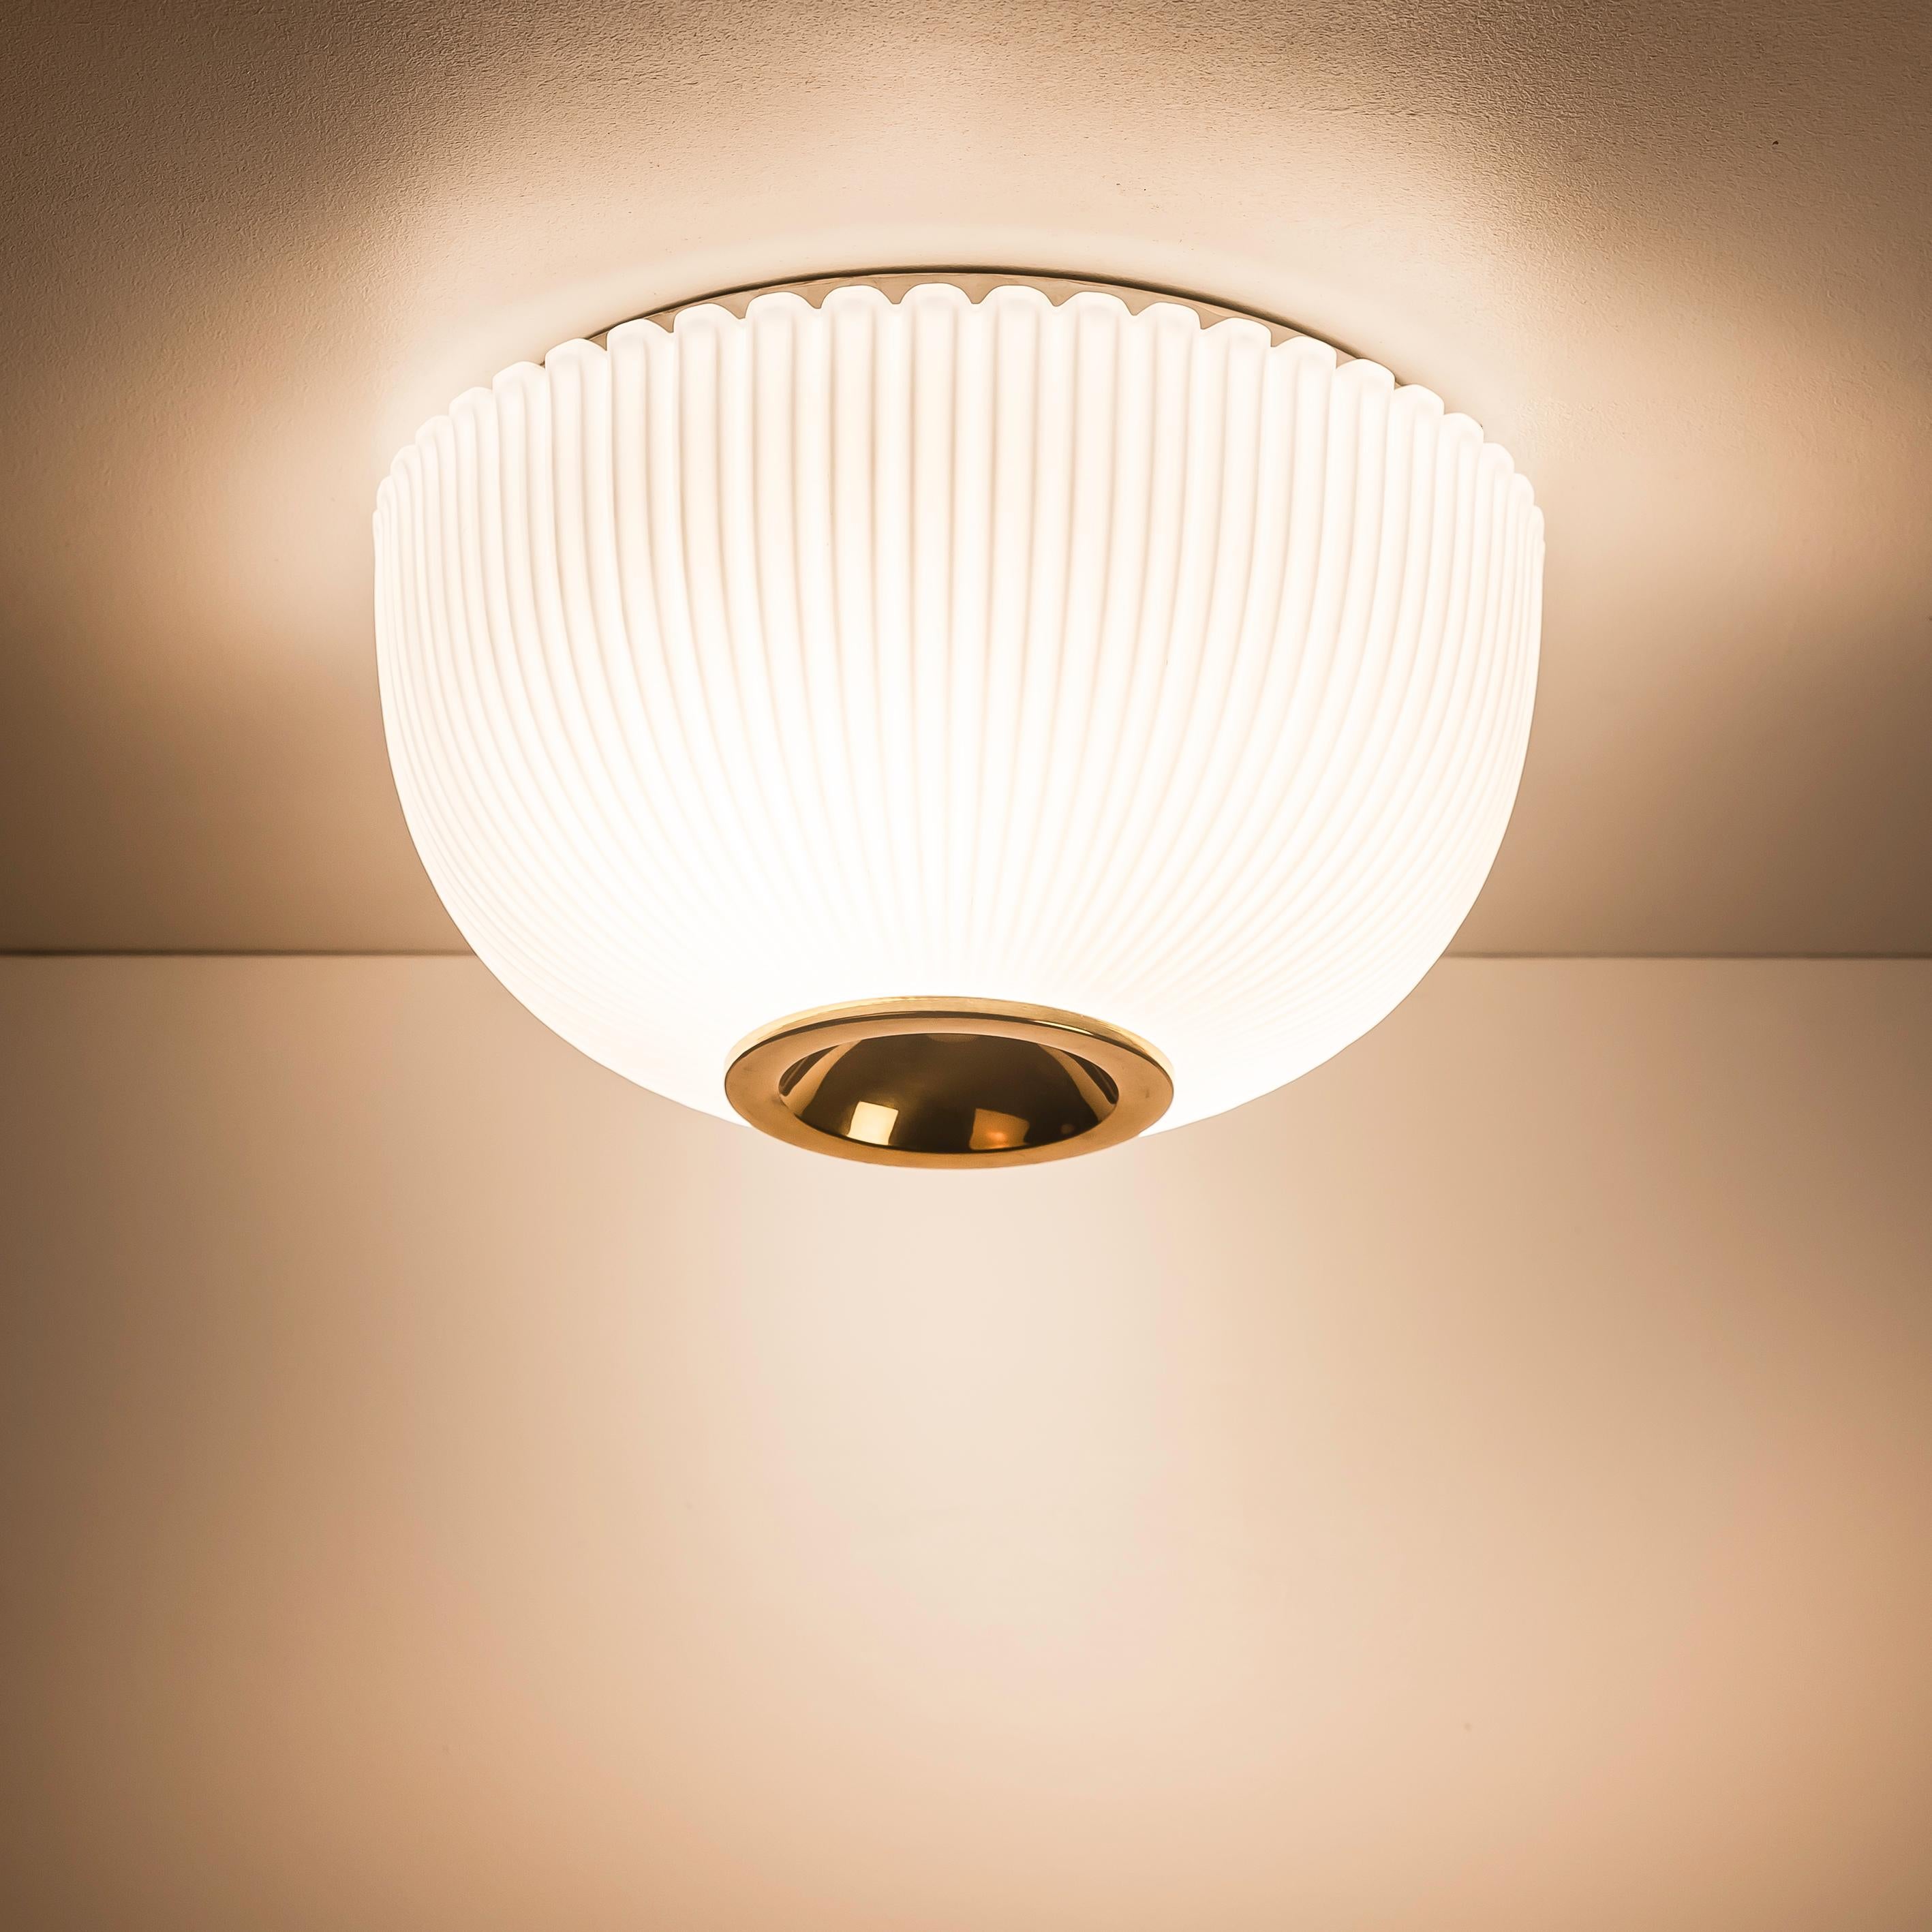 Investing in this Ceiling Light from Limburg, Germany, dating back to the 1970s, offers a unique opportunity to bring a blend of timeless design and quality craftsmanship into your space. Limburg, renowned for its exceptional glasswork, showcases